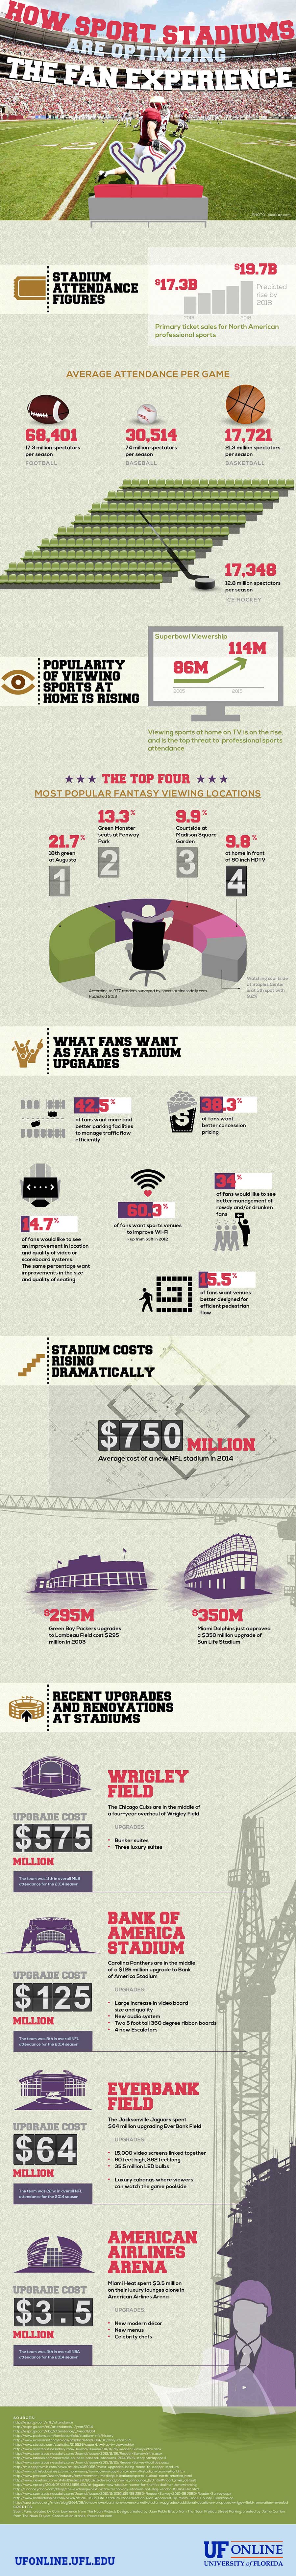 how-sport-stadiums-are-optimizing-fan-experience